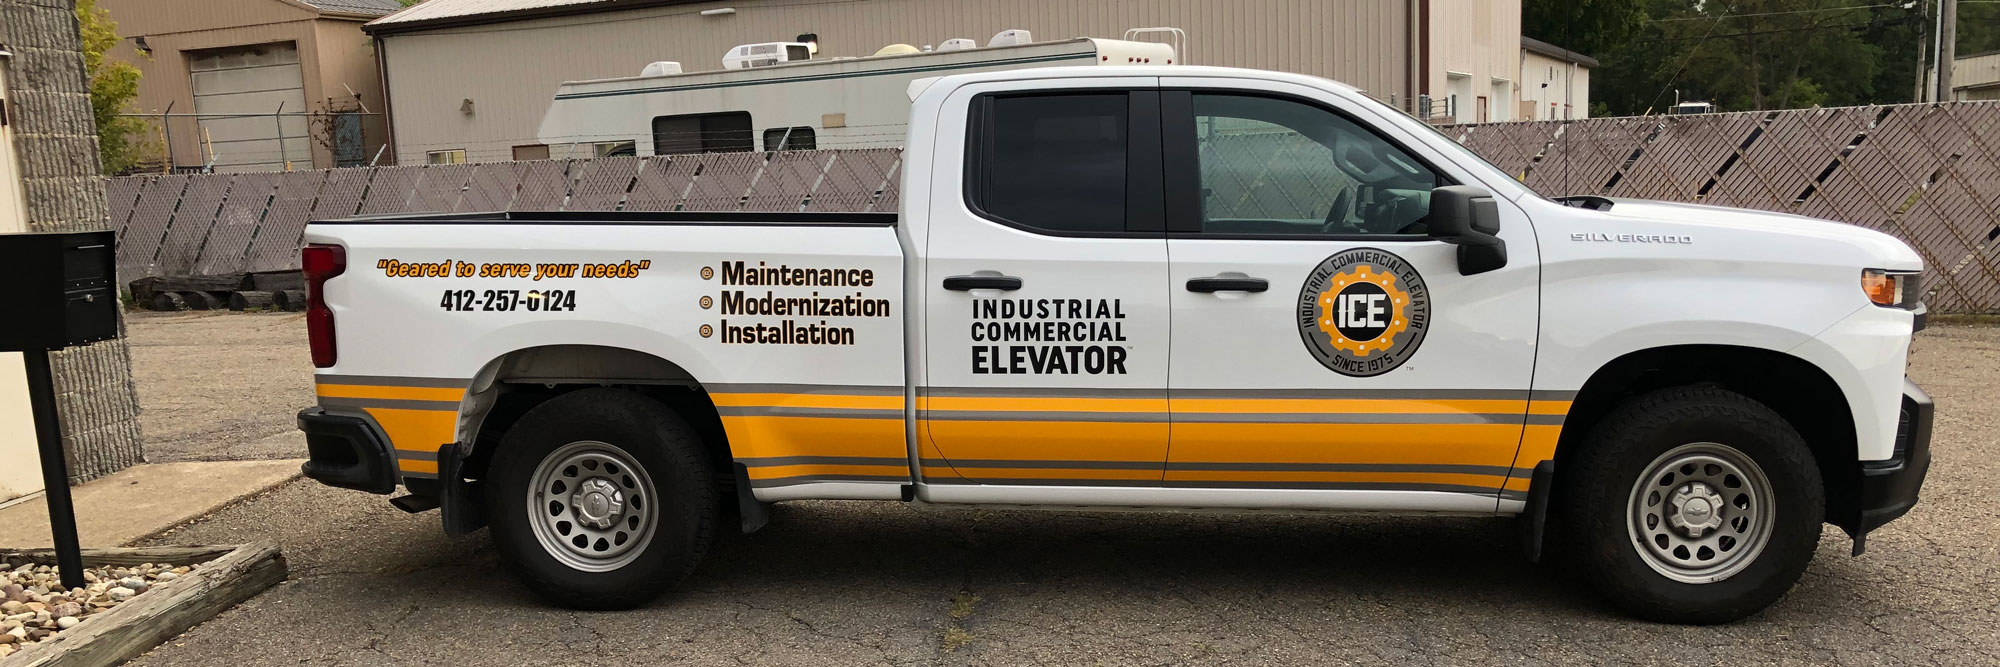 Industrial Commercial Elevator (ICE) is a full-service elevator company employing the best professionally trained elevator technicians and apprentices in the industry and an administrative and sales team with a combined 125 years of experience.